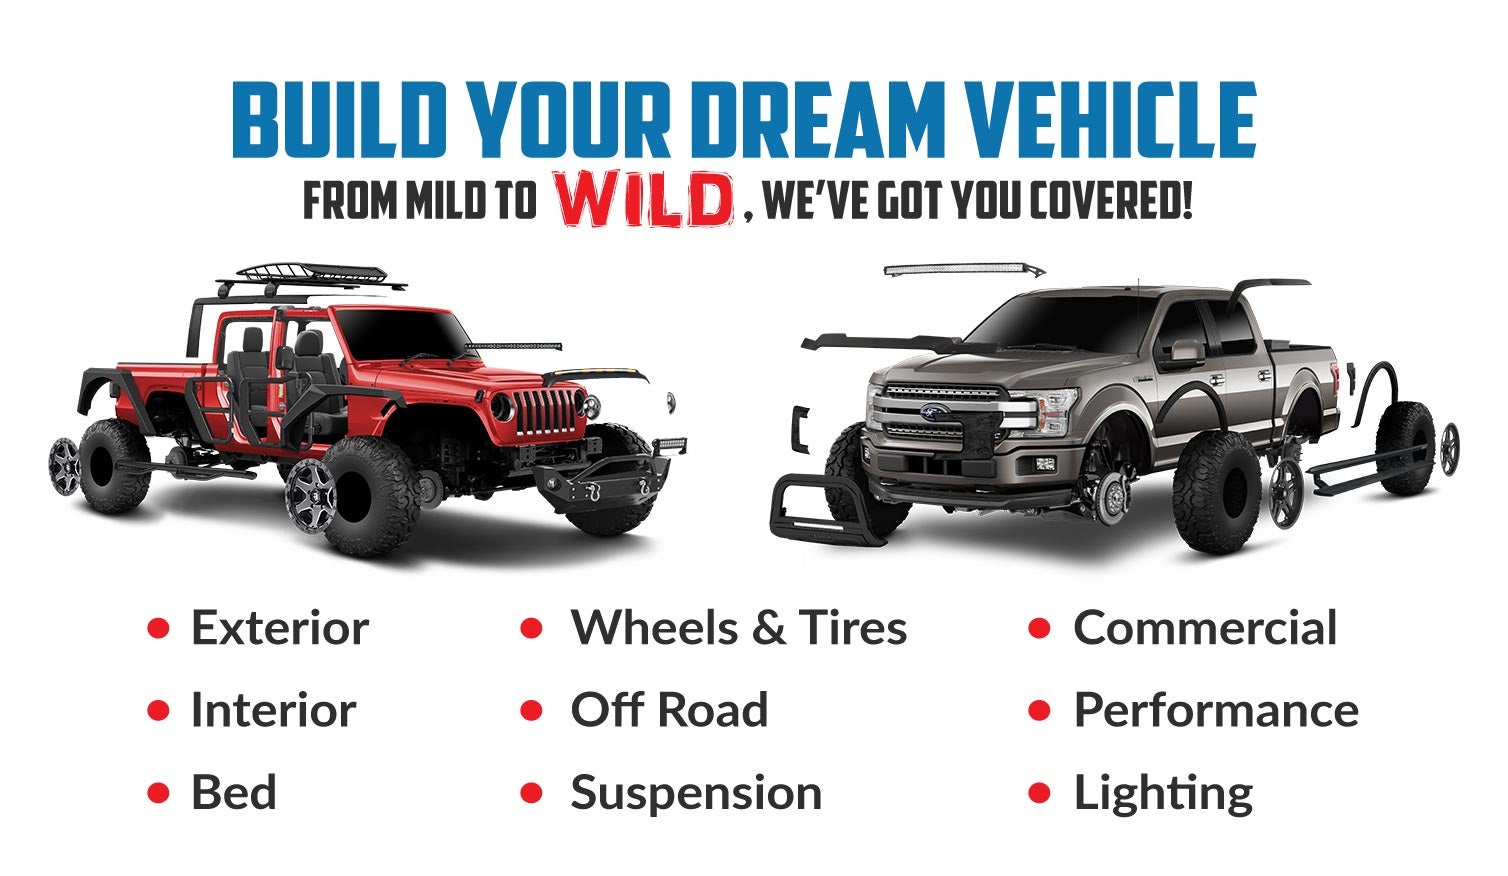 Build your dream vehicle. Exterior, interior, bed, wheels & tires, off road, suspension, commercial, performance, lighting.